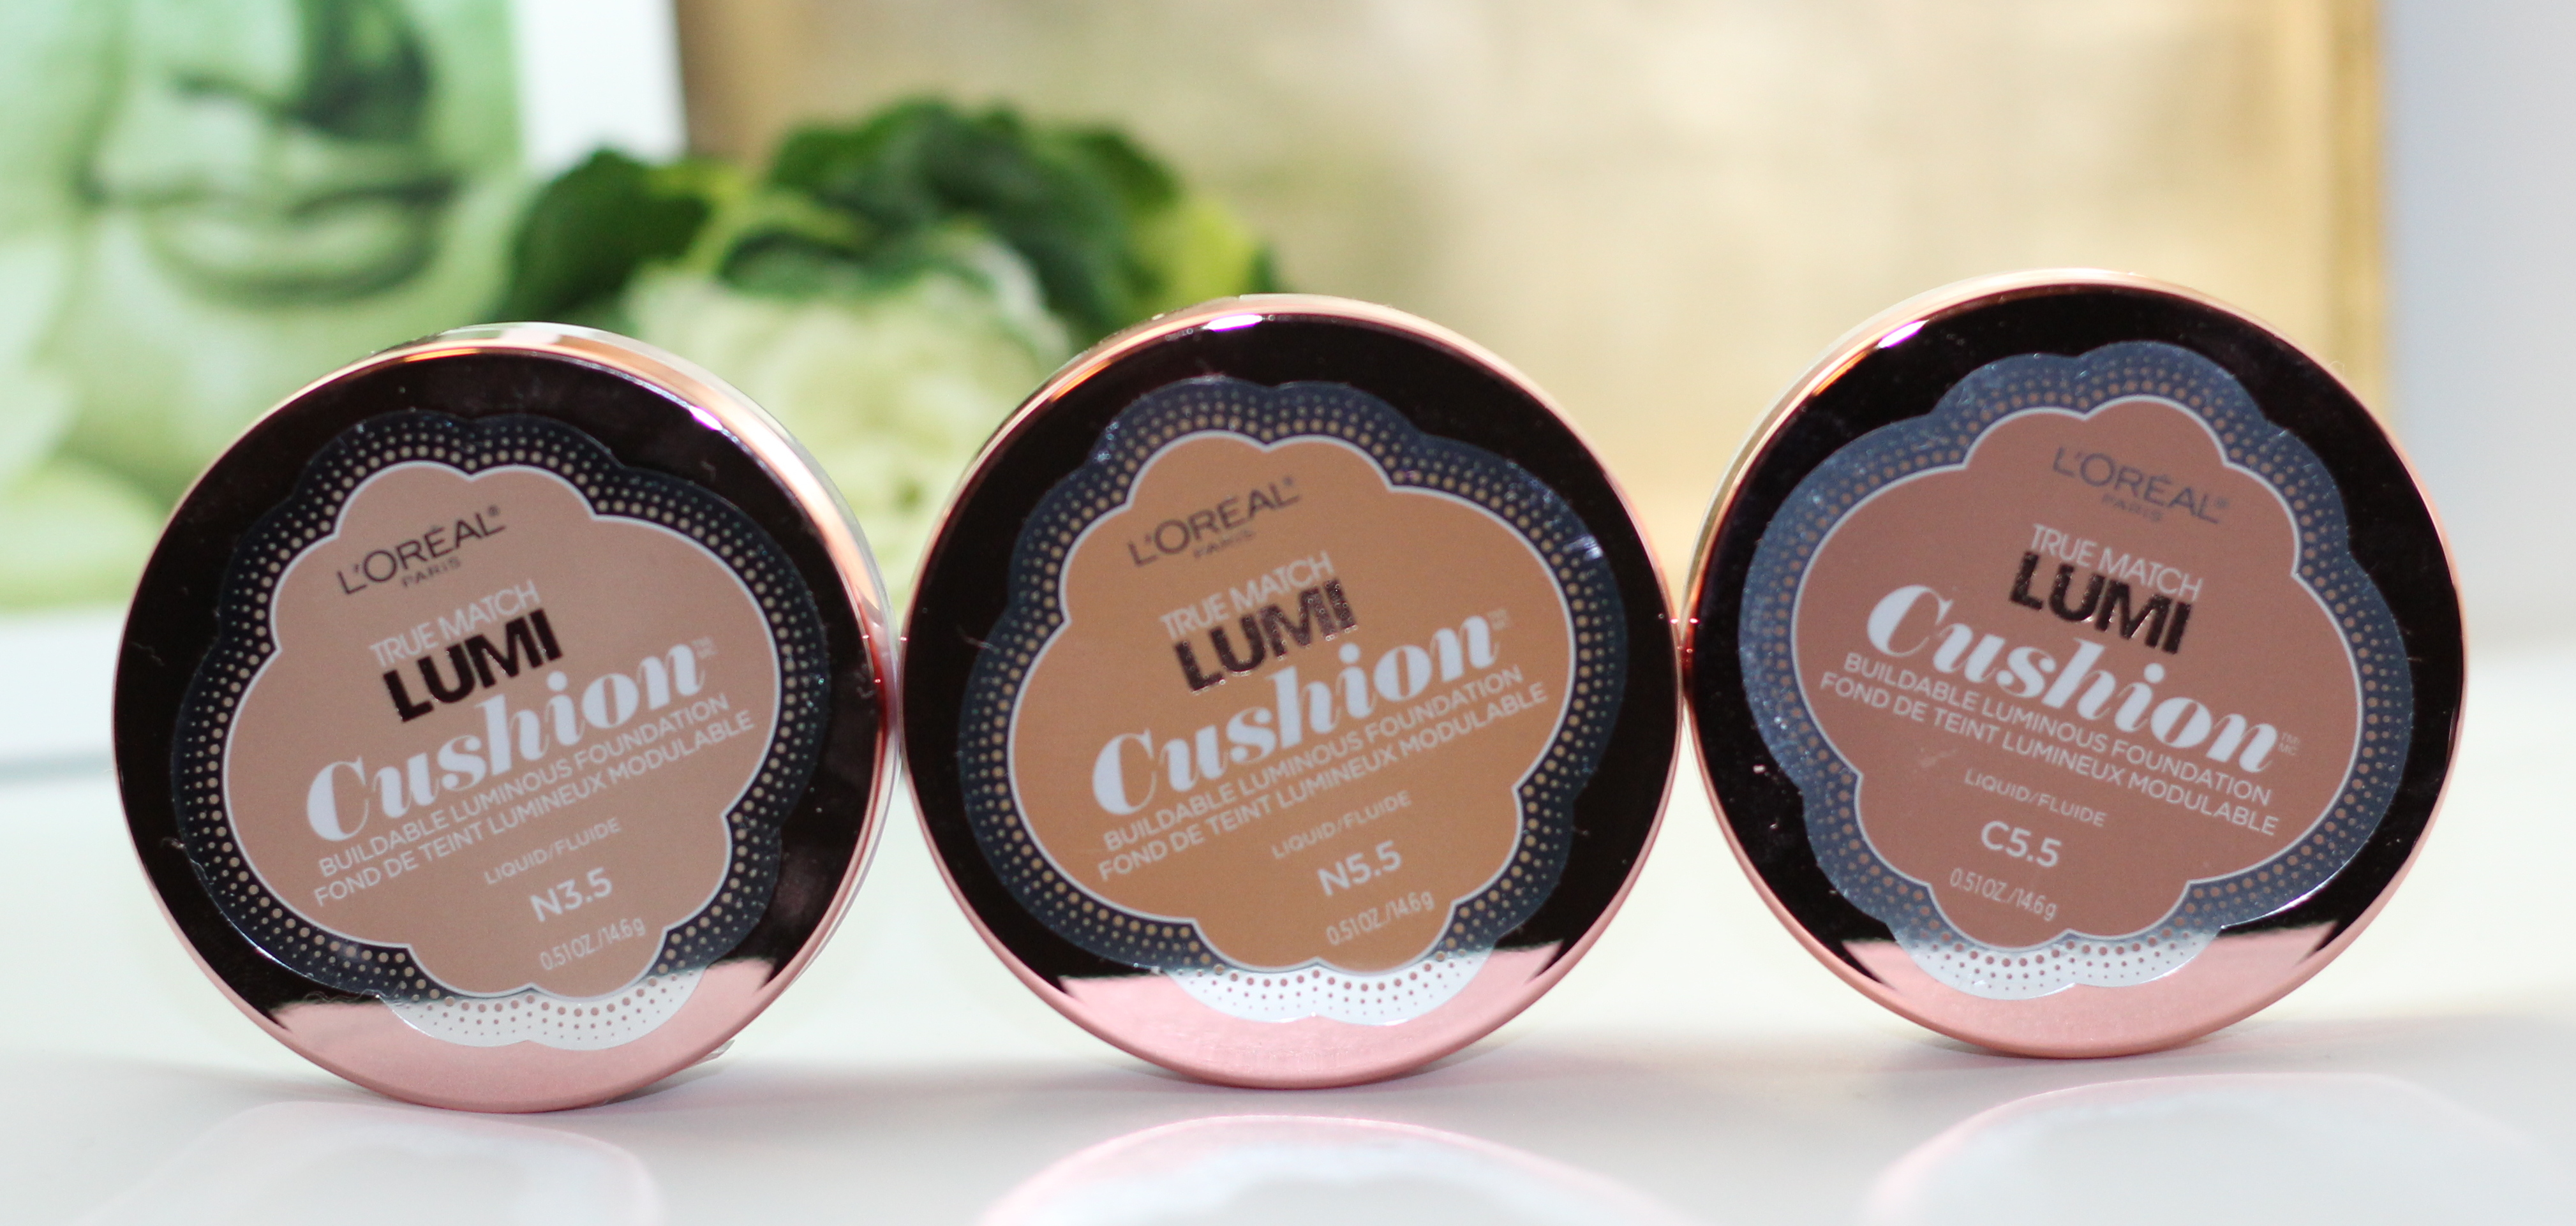 Swatch & Review: L’Oreal Lumi Cushion Foundation